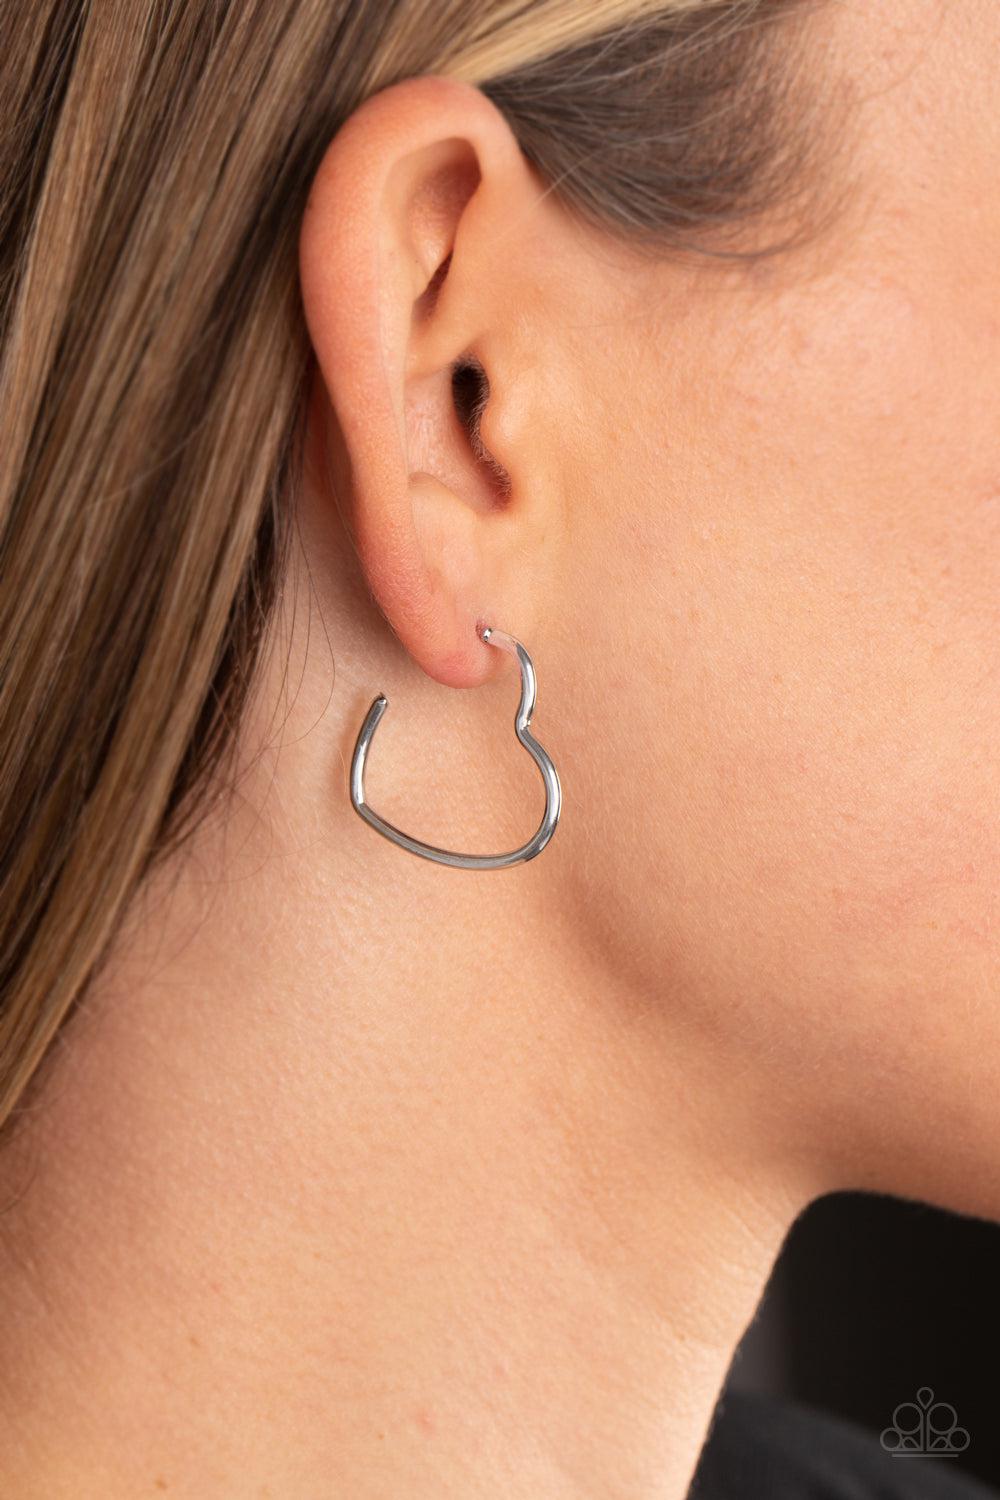 Burnished Beau Silver Heart Hoop Earrings - Paparazzi Accessories- lightbox - CarasShop.com - $5 Jewelry by Cara Jewels